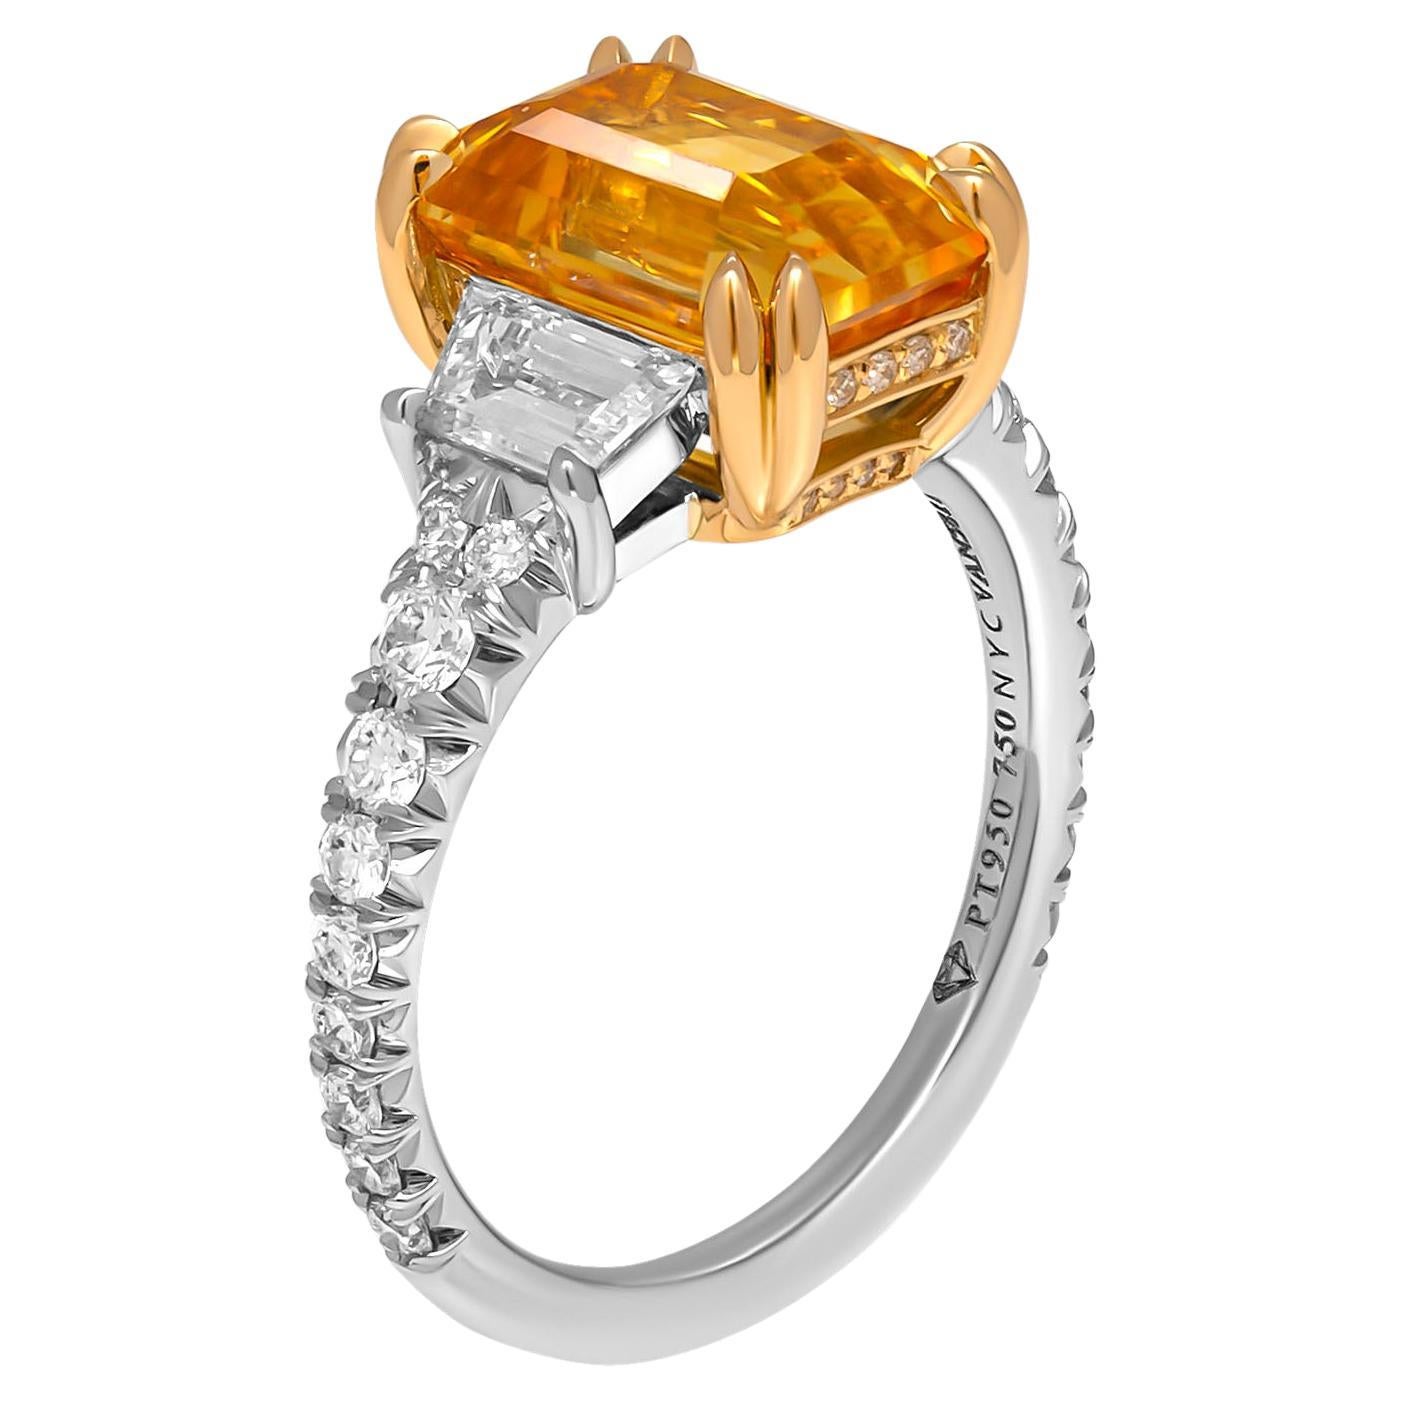 3-Stone Ring with 5.02ct Yellow Sapphire